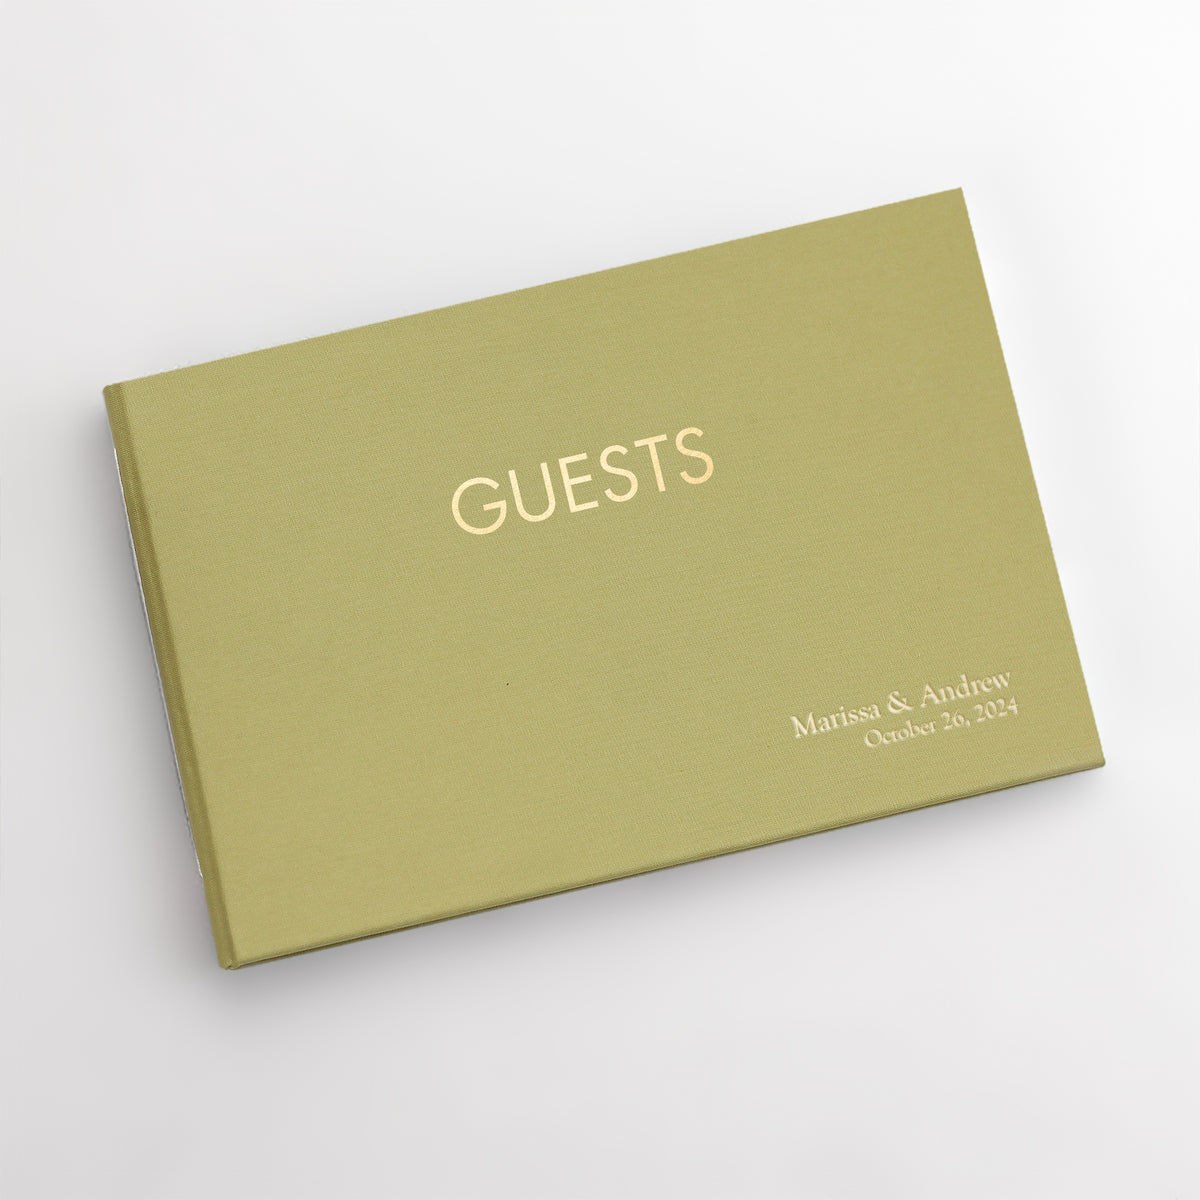 Guestbook Embossed with “Guests” | Cover: Celery Cotton | Available Personalized